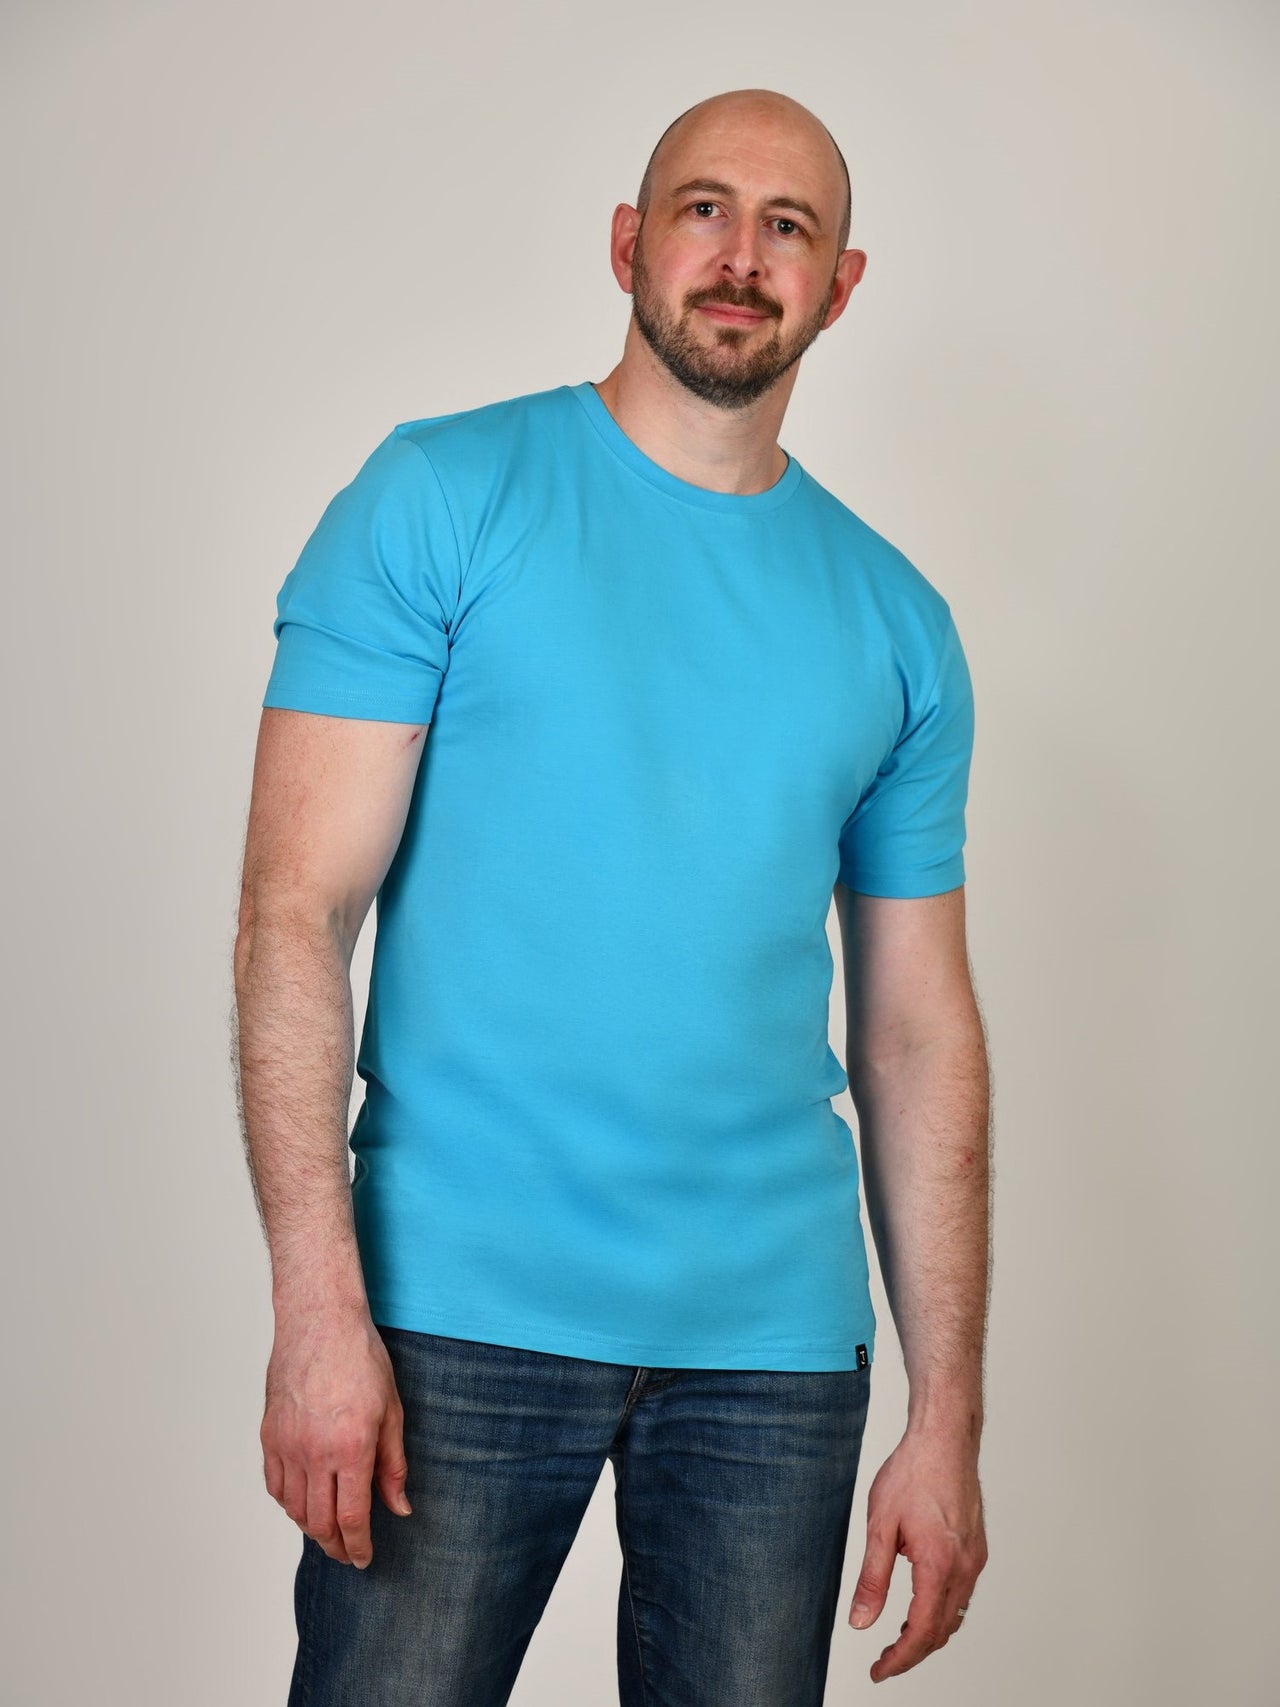 A tall and slim guy smiling in the studio and wearing a cyan XL tall slim t-shirt.